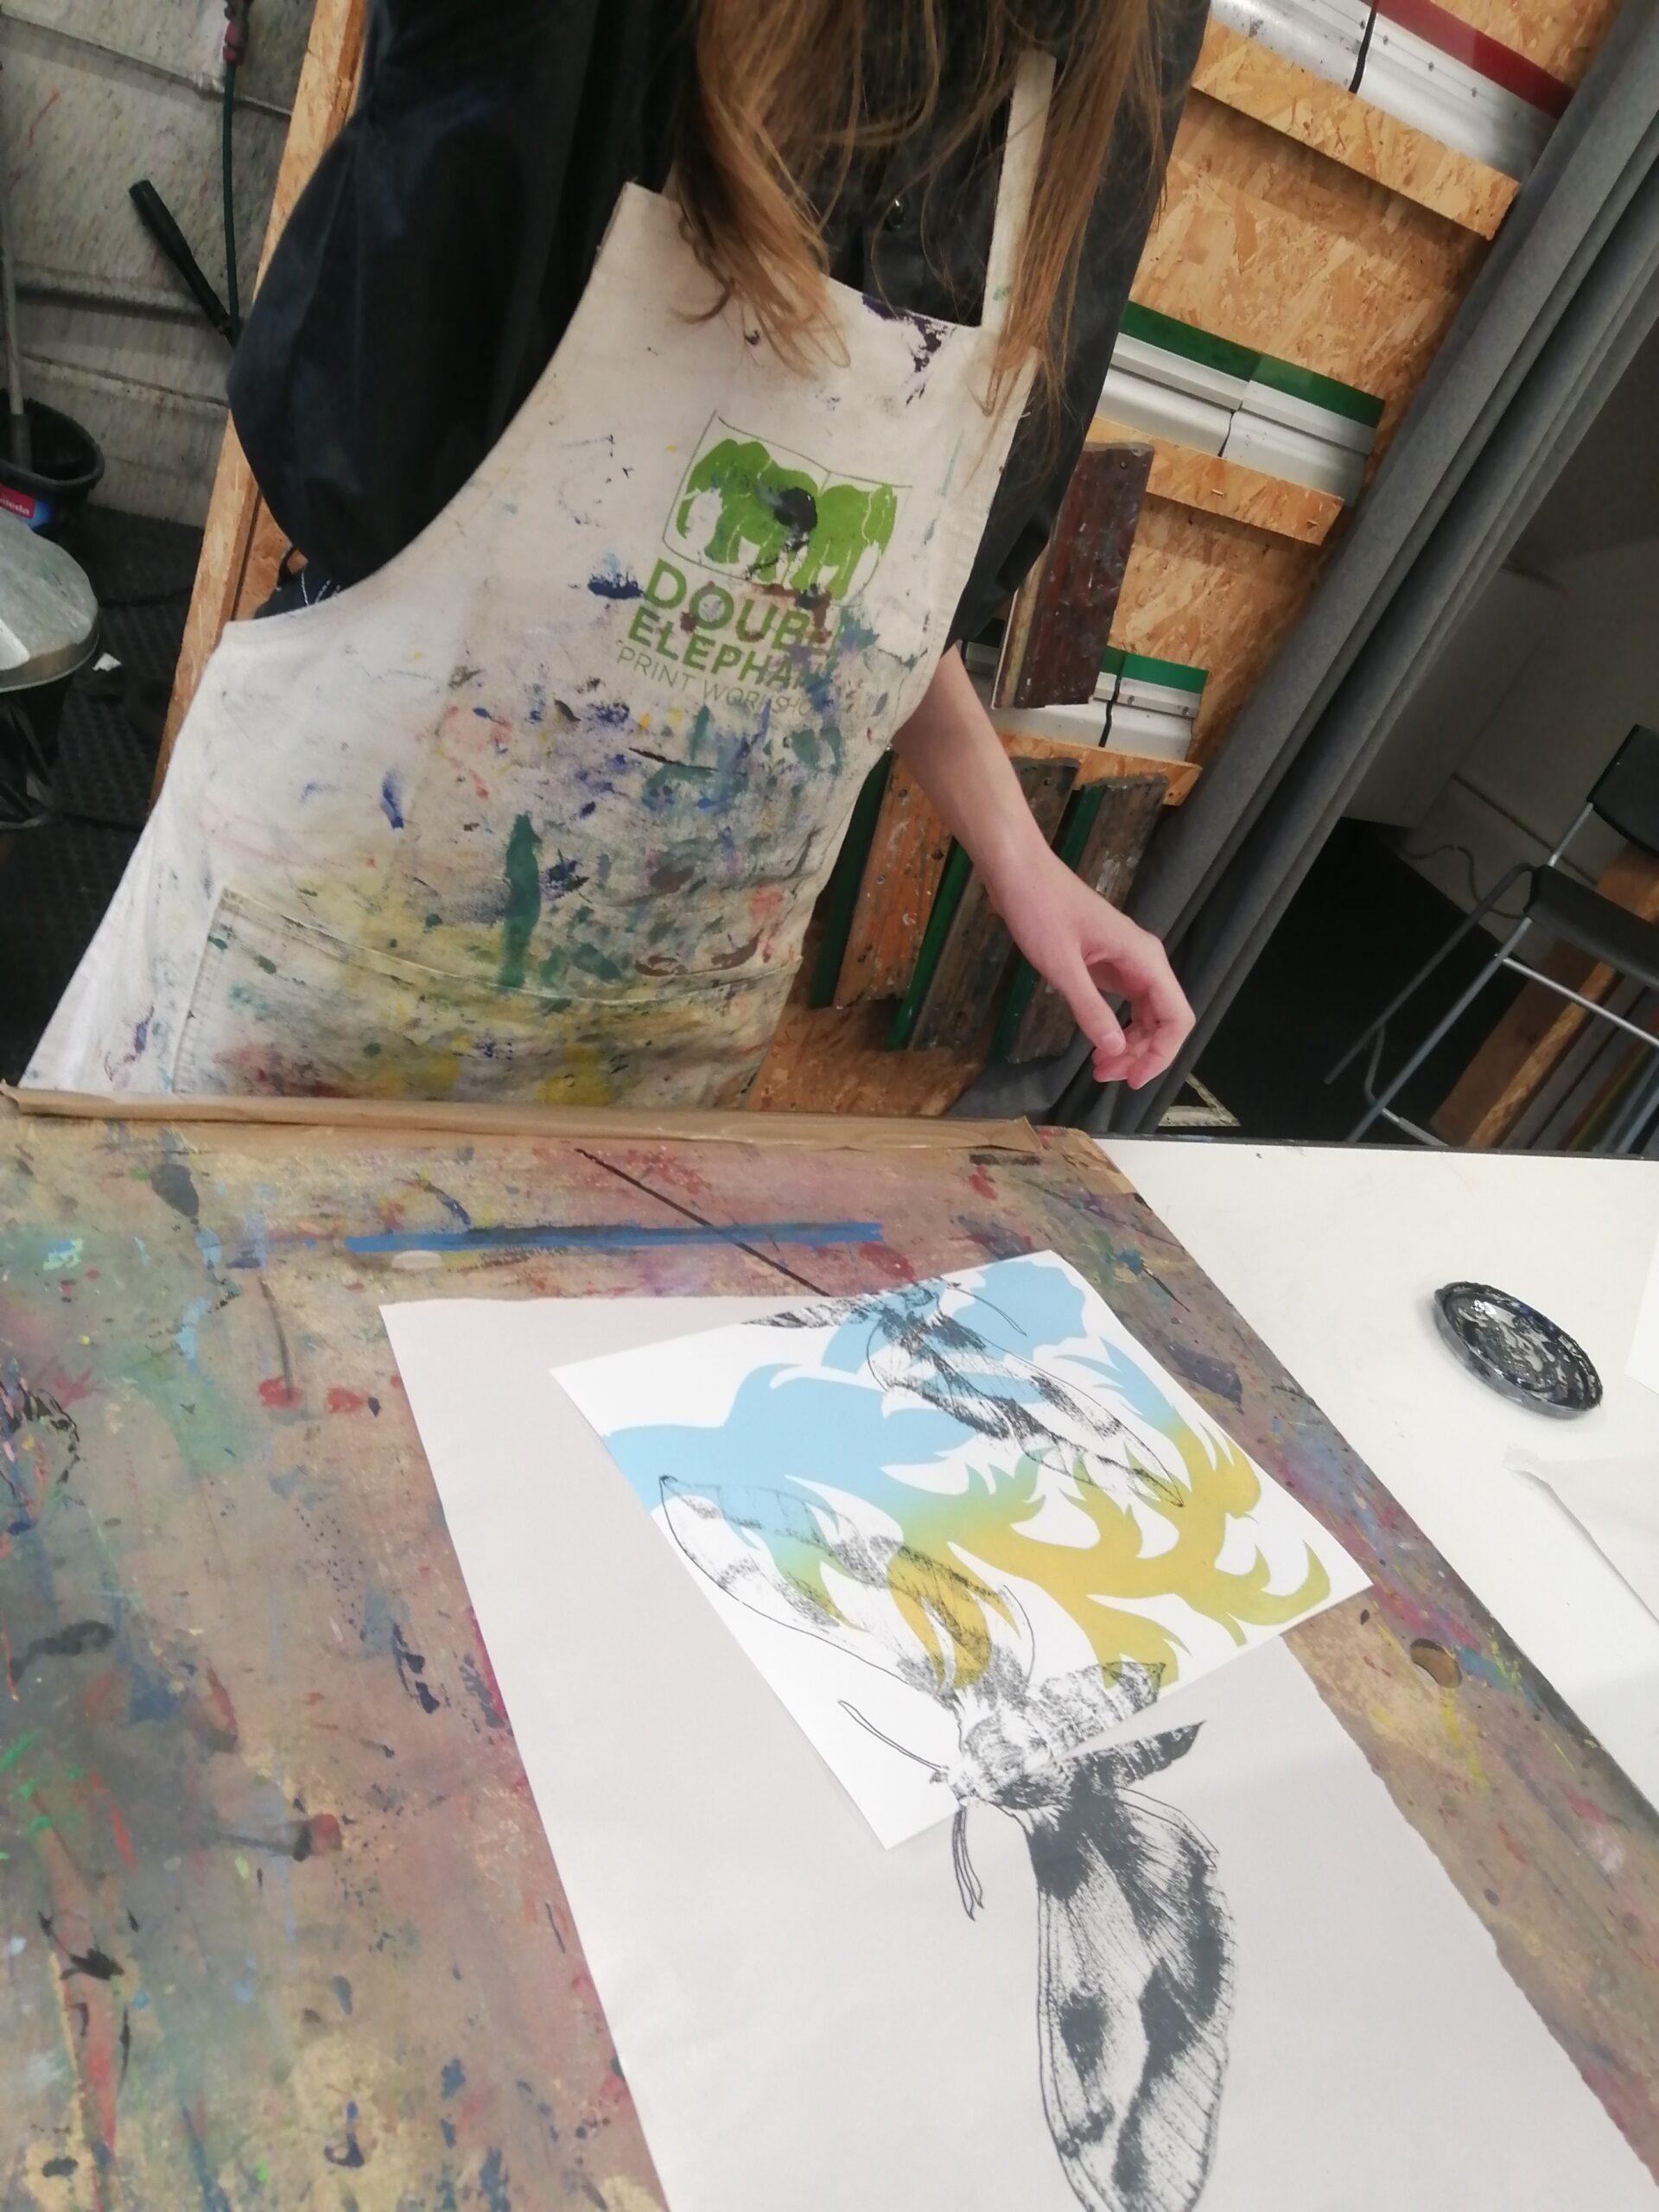 Project Buzz Young Carer's art workshop